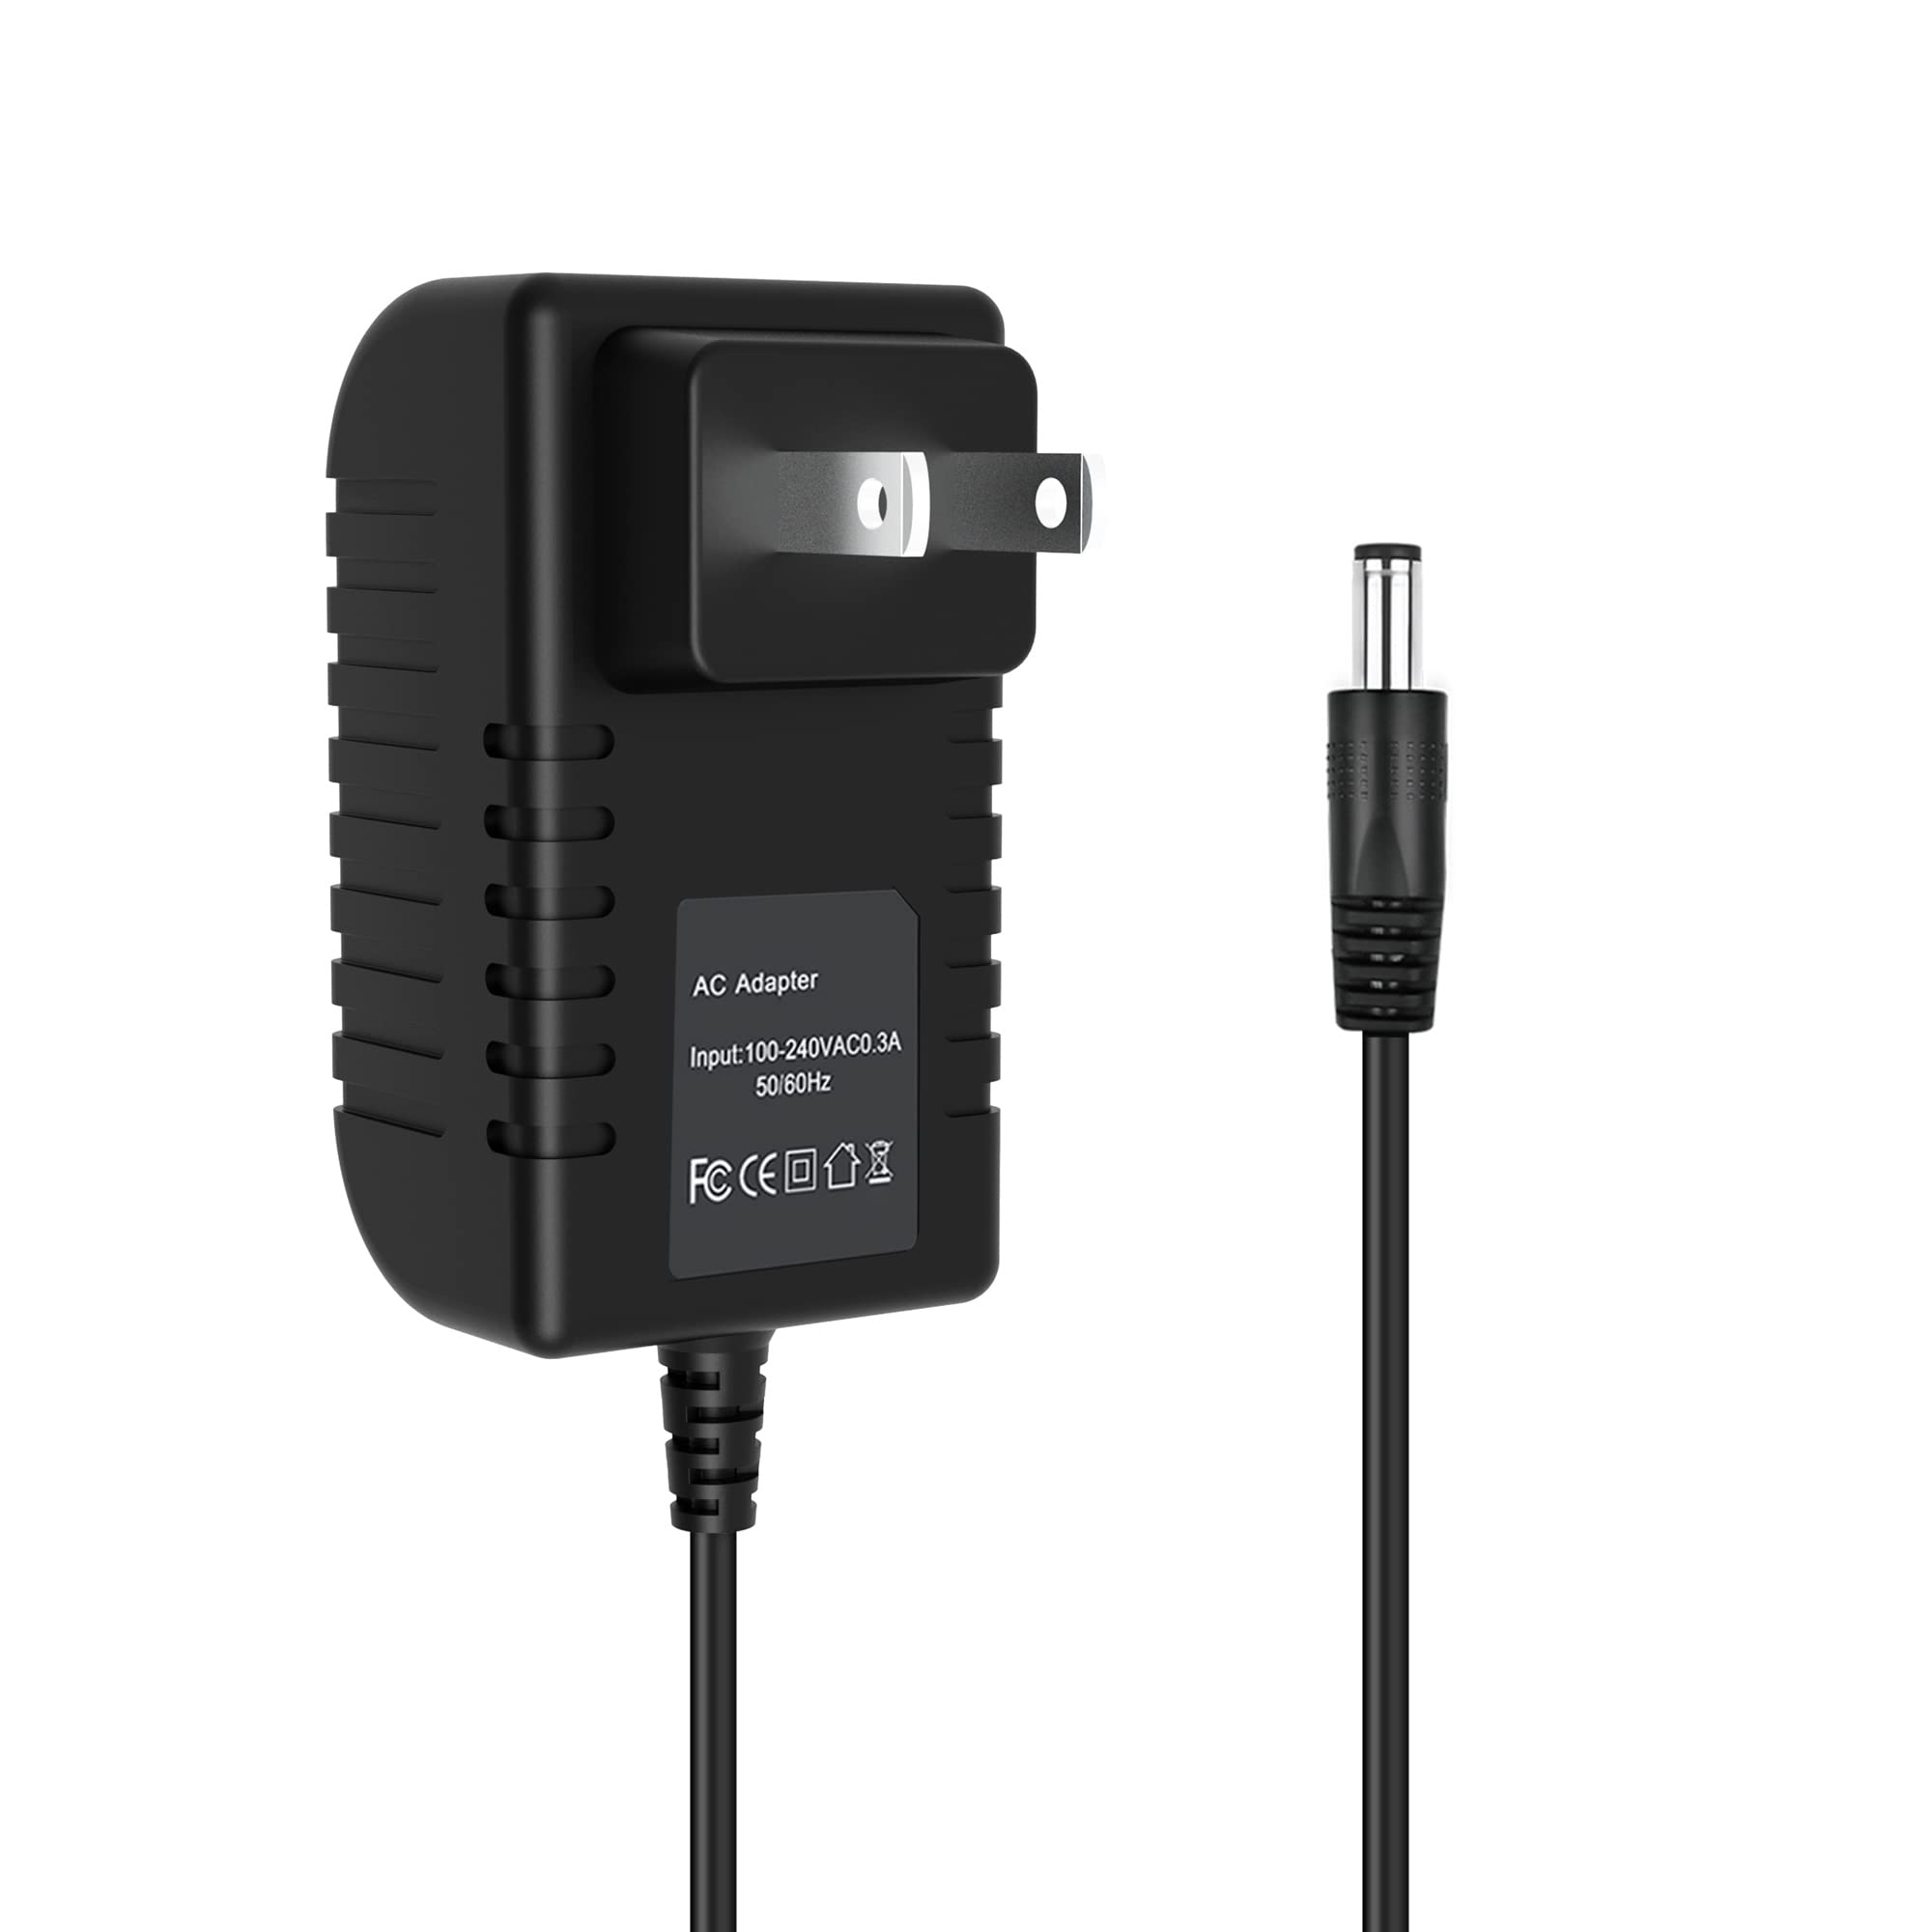 J-ZMQER 12V 2A DC Adapter Power Wall Charger Cord Compatible with Petsafe Wireless Fence PIF-300 PSU